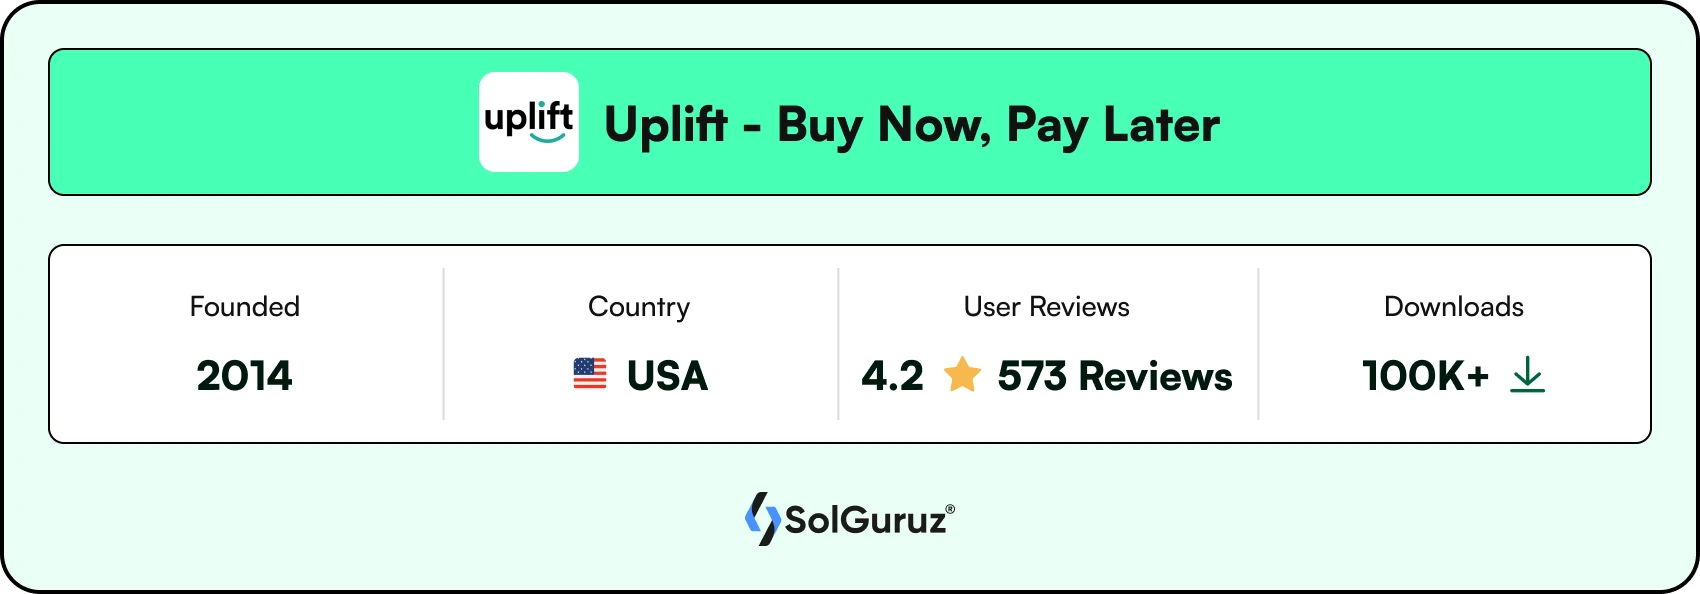 Uplift - Buy Now, Pay Later App